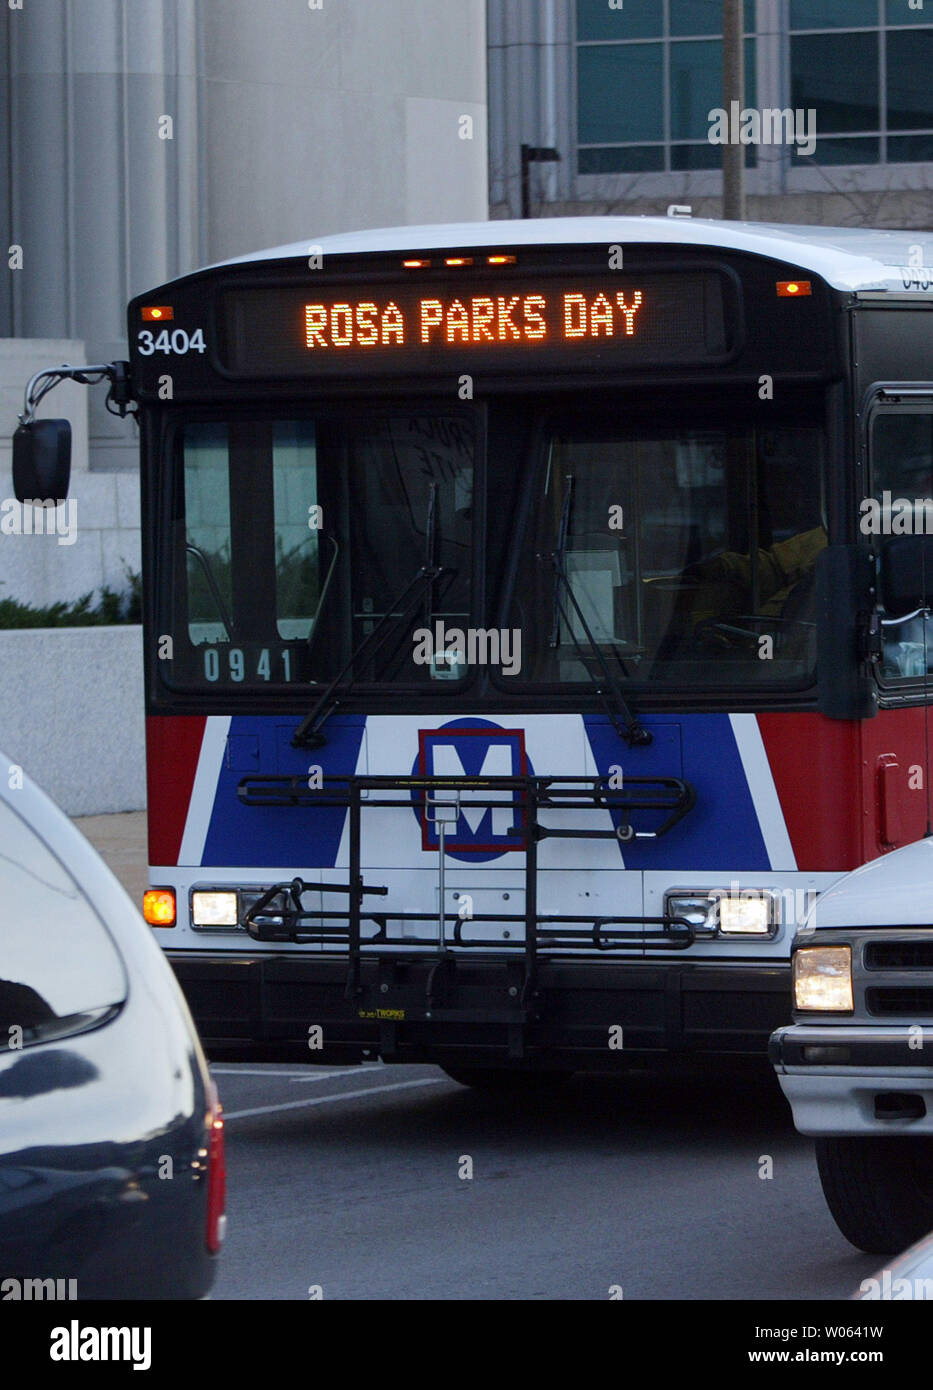 https://c8.alamy.com/comp/W0641W/a-metro-bus-displays-rosa-parks-day-on-its-message-board-as-it-drives-its-route-in-st-louis-on-december-1-2005-all-433-metro-buses-in-st-louis-honored-the-life-of-rosa-parks-on-the-50th-anniversary-of-the-day-parks-was-arrested-for-not-giving-up-her-seat-on-a-city-bus-to-a-white-man-in-montgomery-al-in-1955-upi-photobill-greenblatt-W0641W.jpg